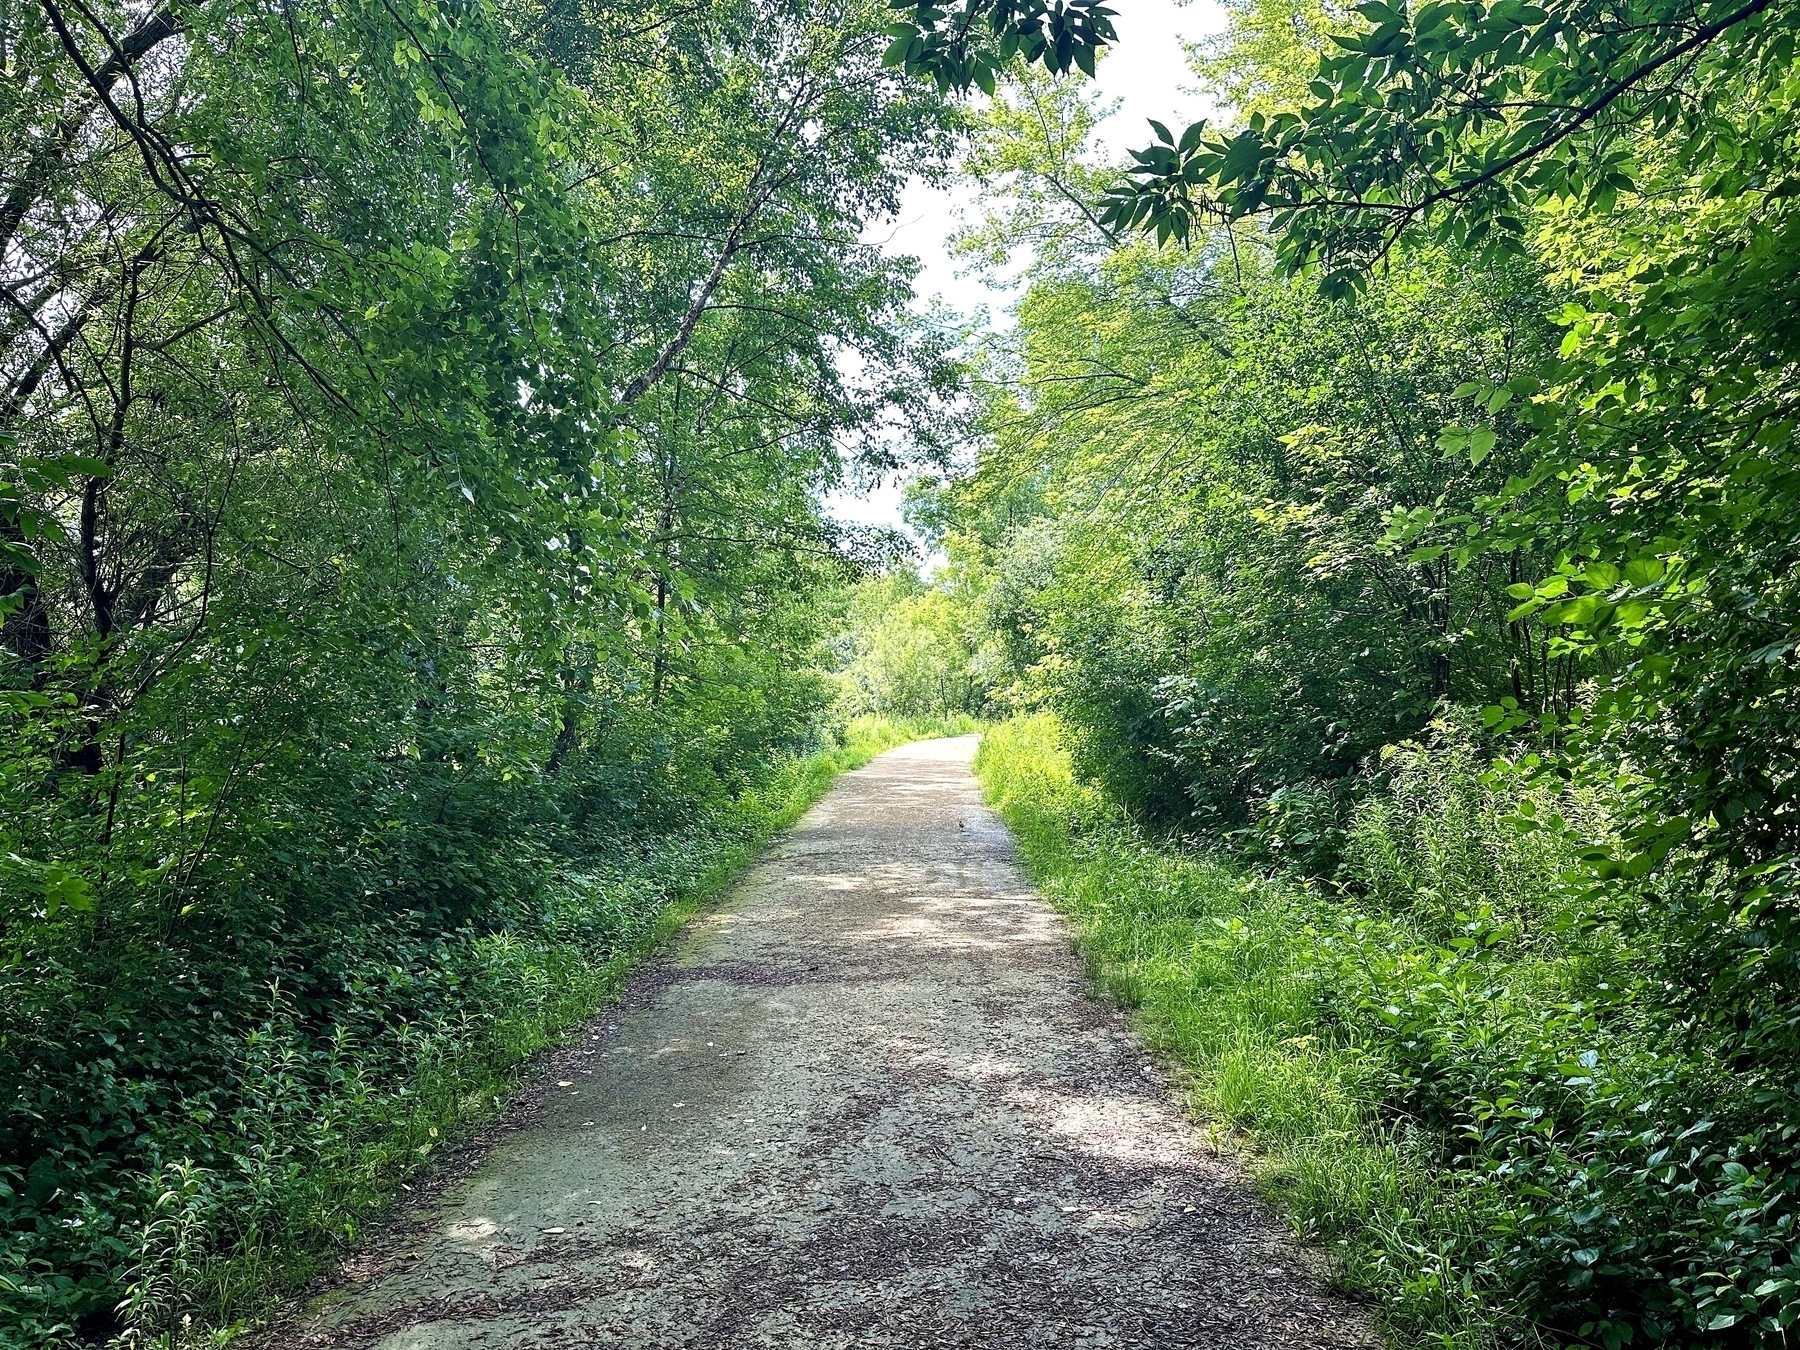 A dirt path stretches forward through a forest filled with lush green trees and dense foliage under bright daylight.